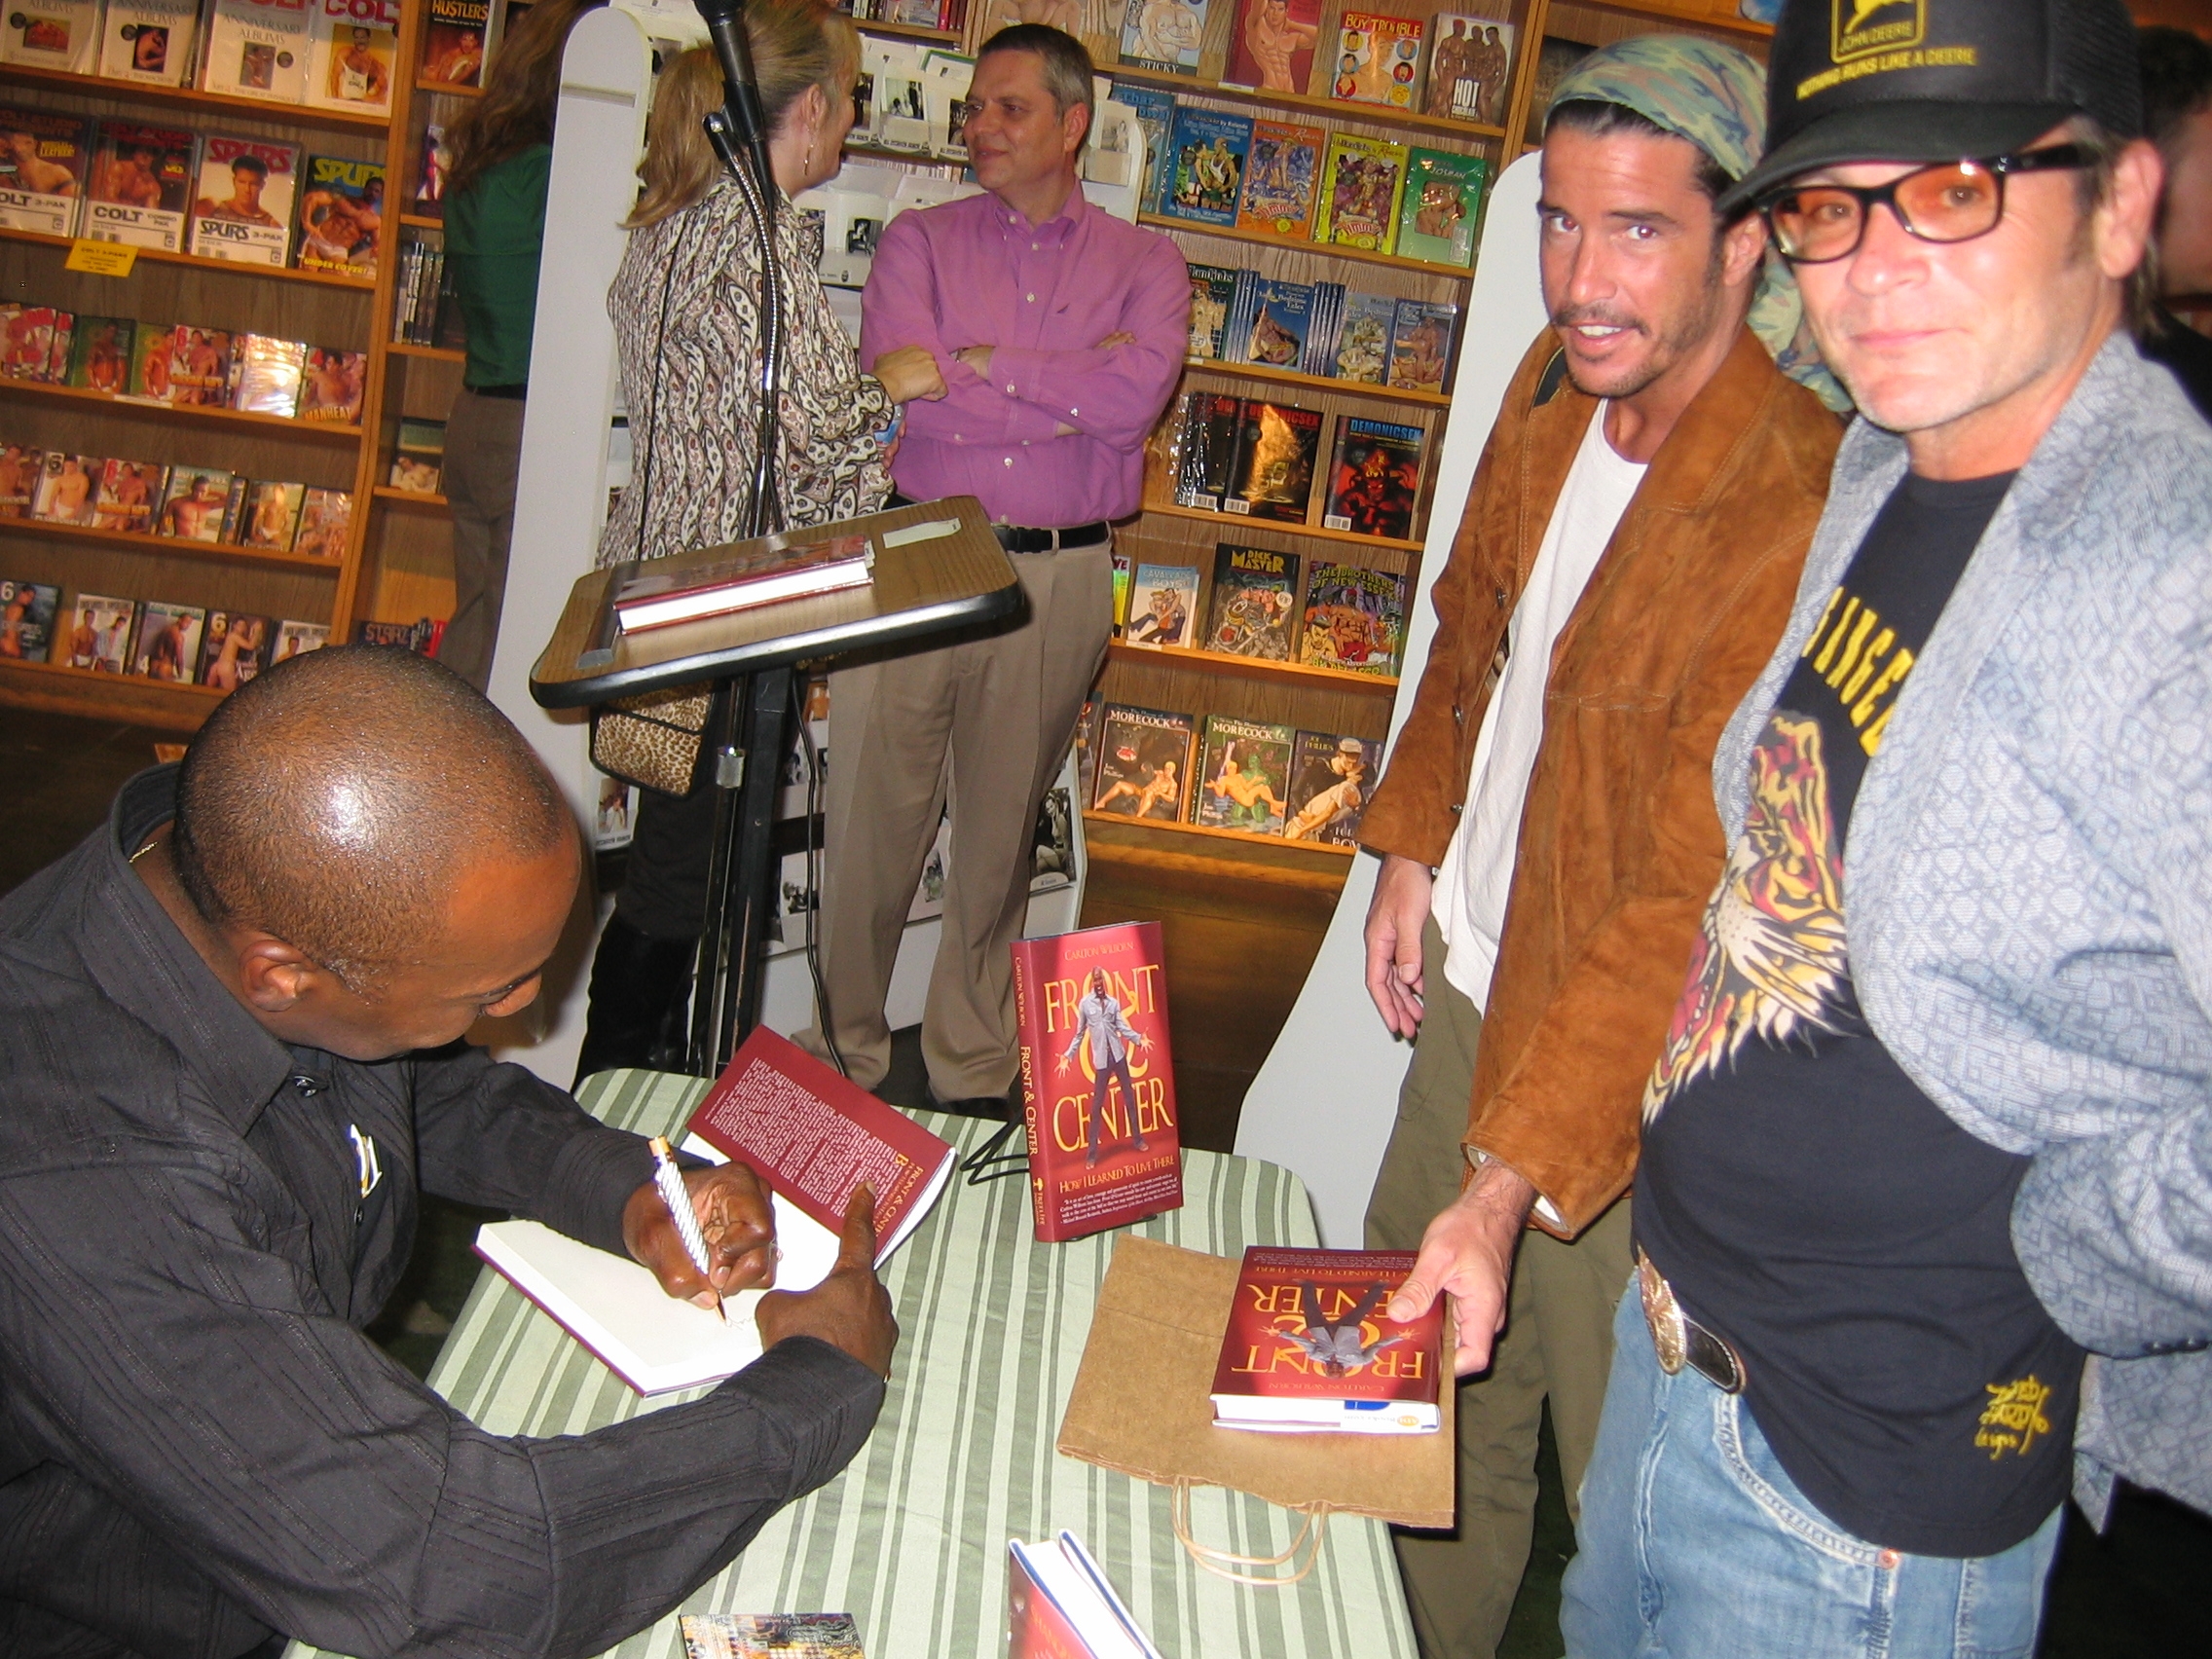 Carlton at the book signing for the debut of his autobiography Front & Center - How I Learned To Live There.